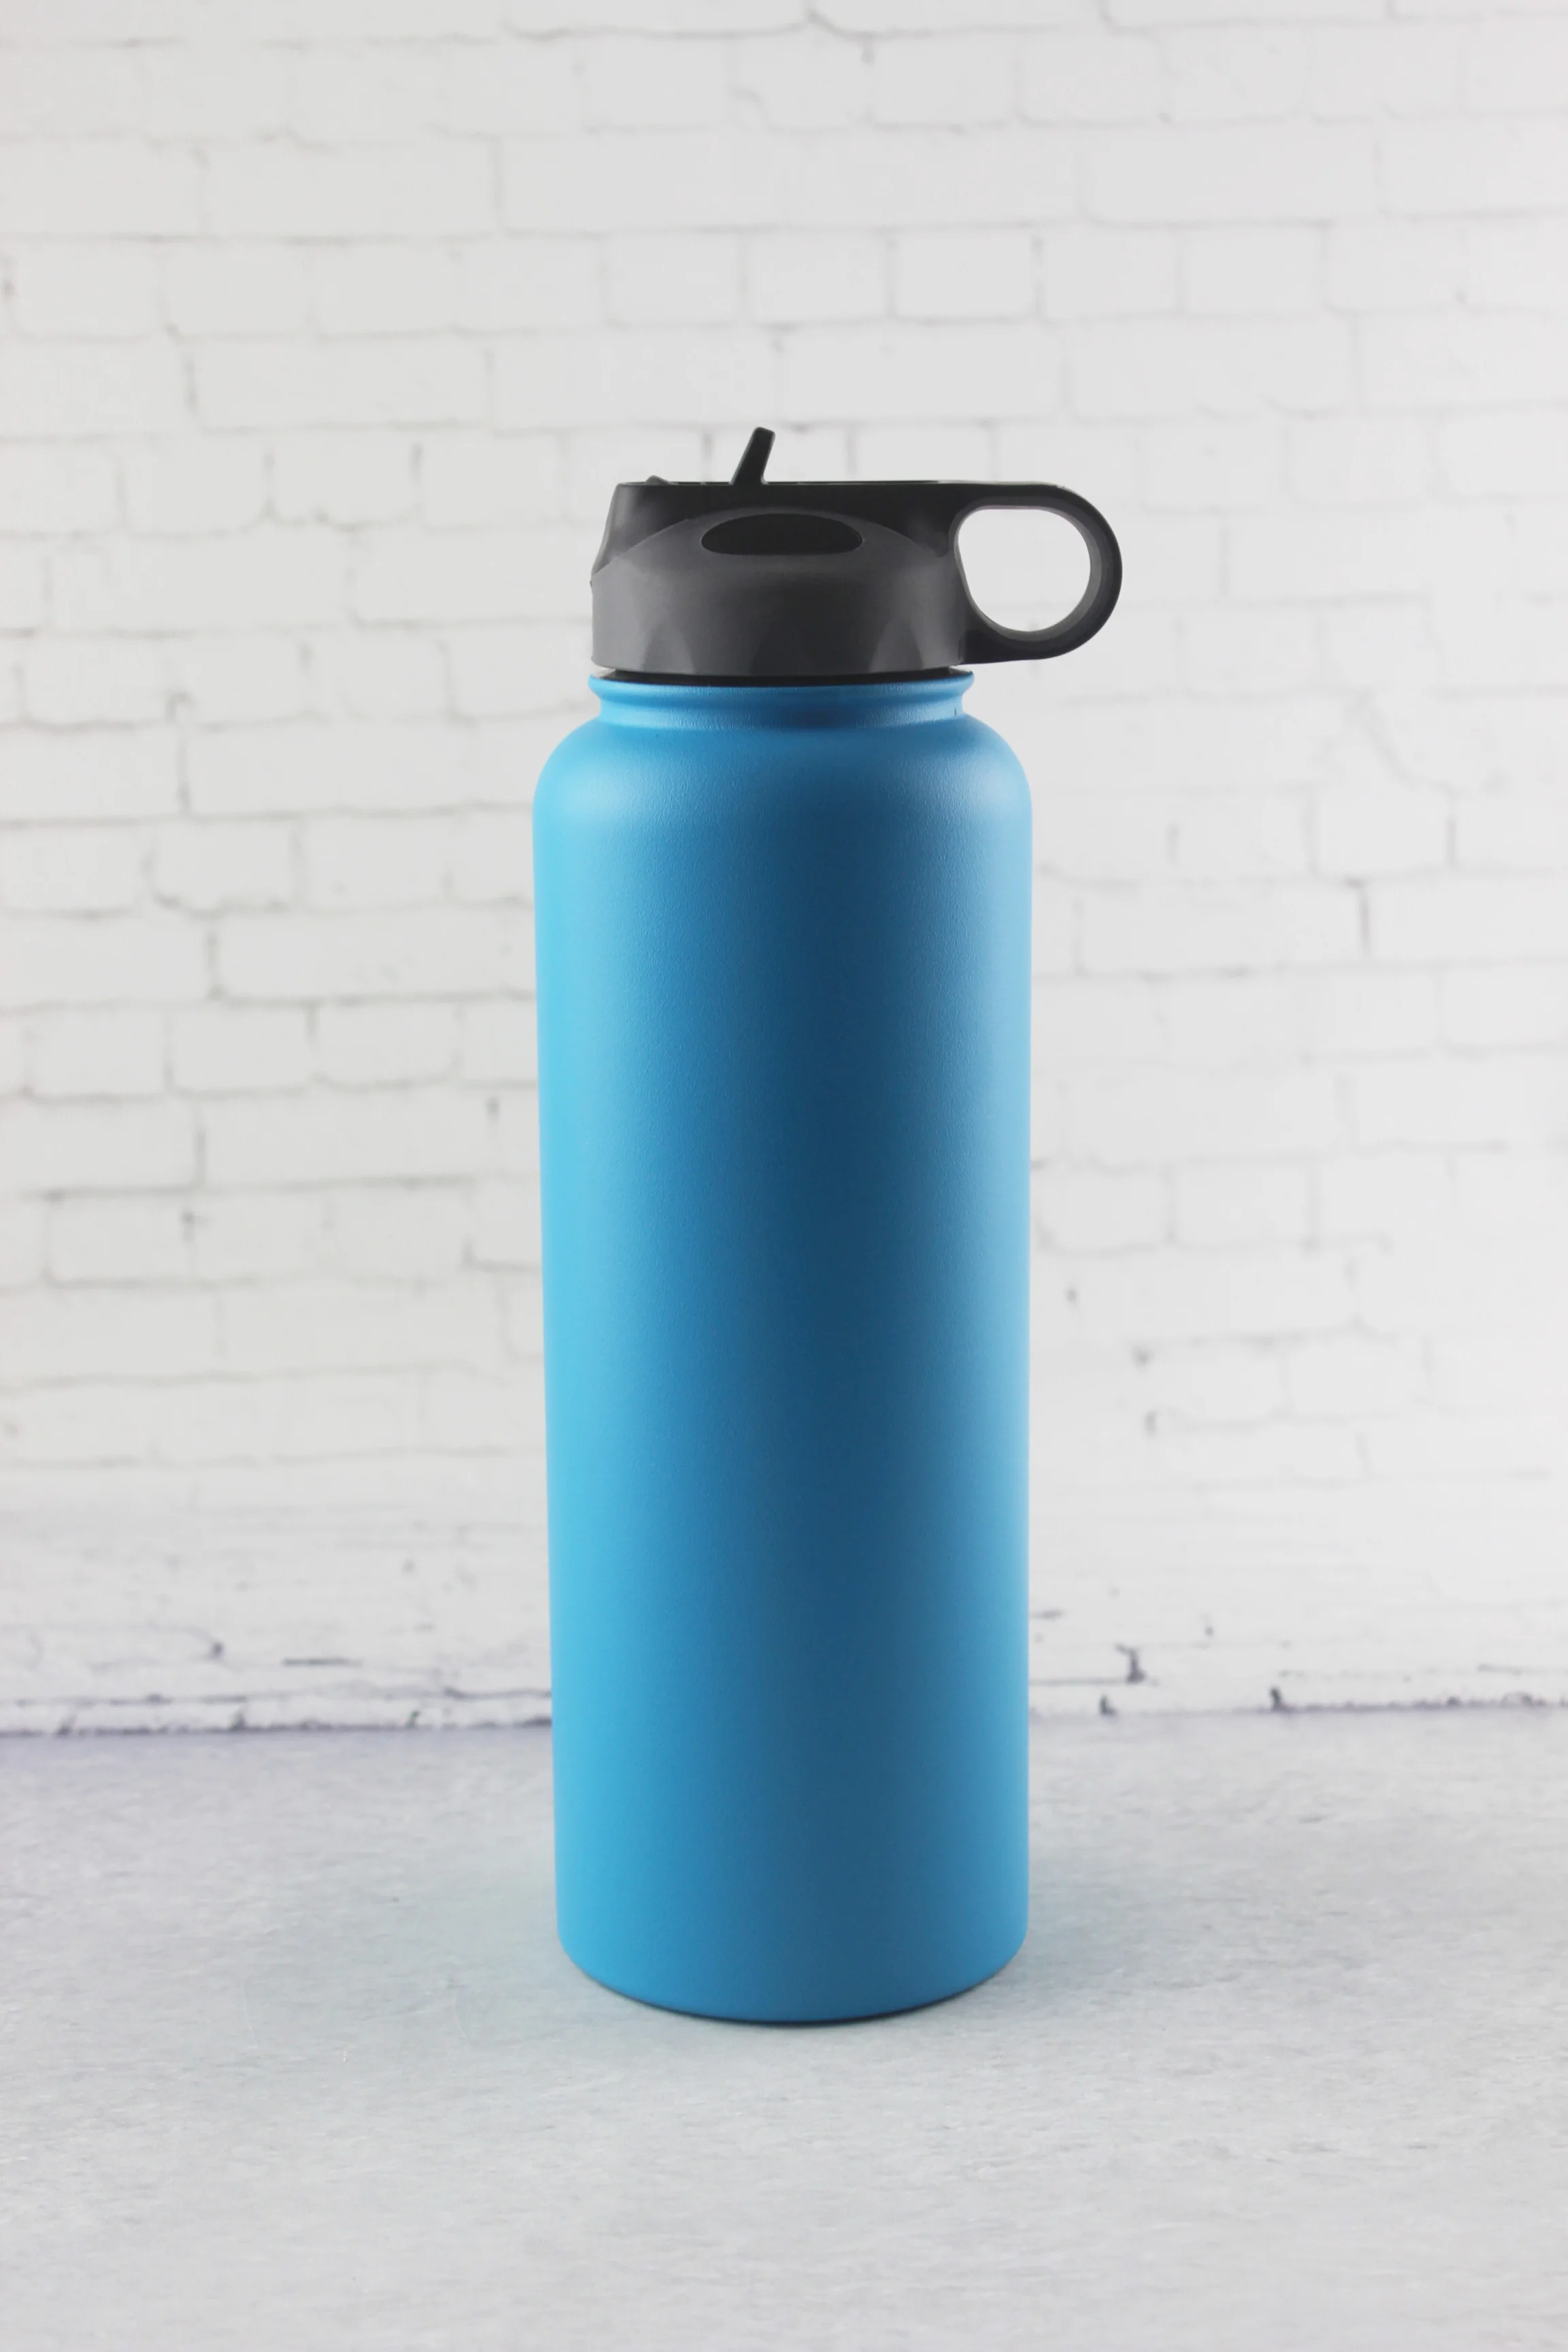 32 Oz Vacuum Flasks With Straw Lid,Double Wall Vacuum Stainless Steel ...